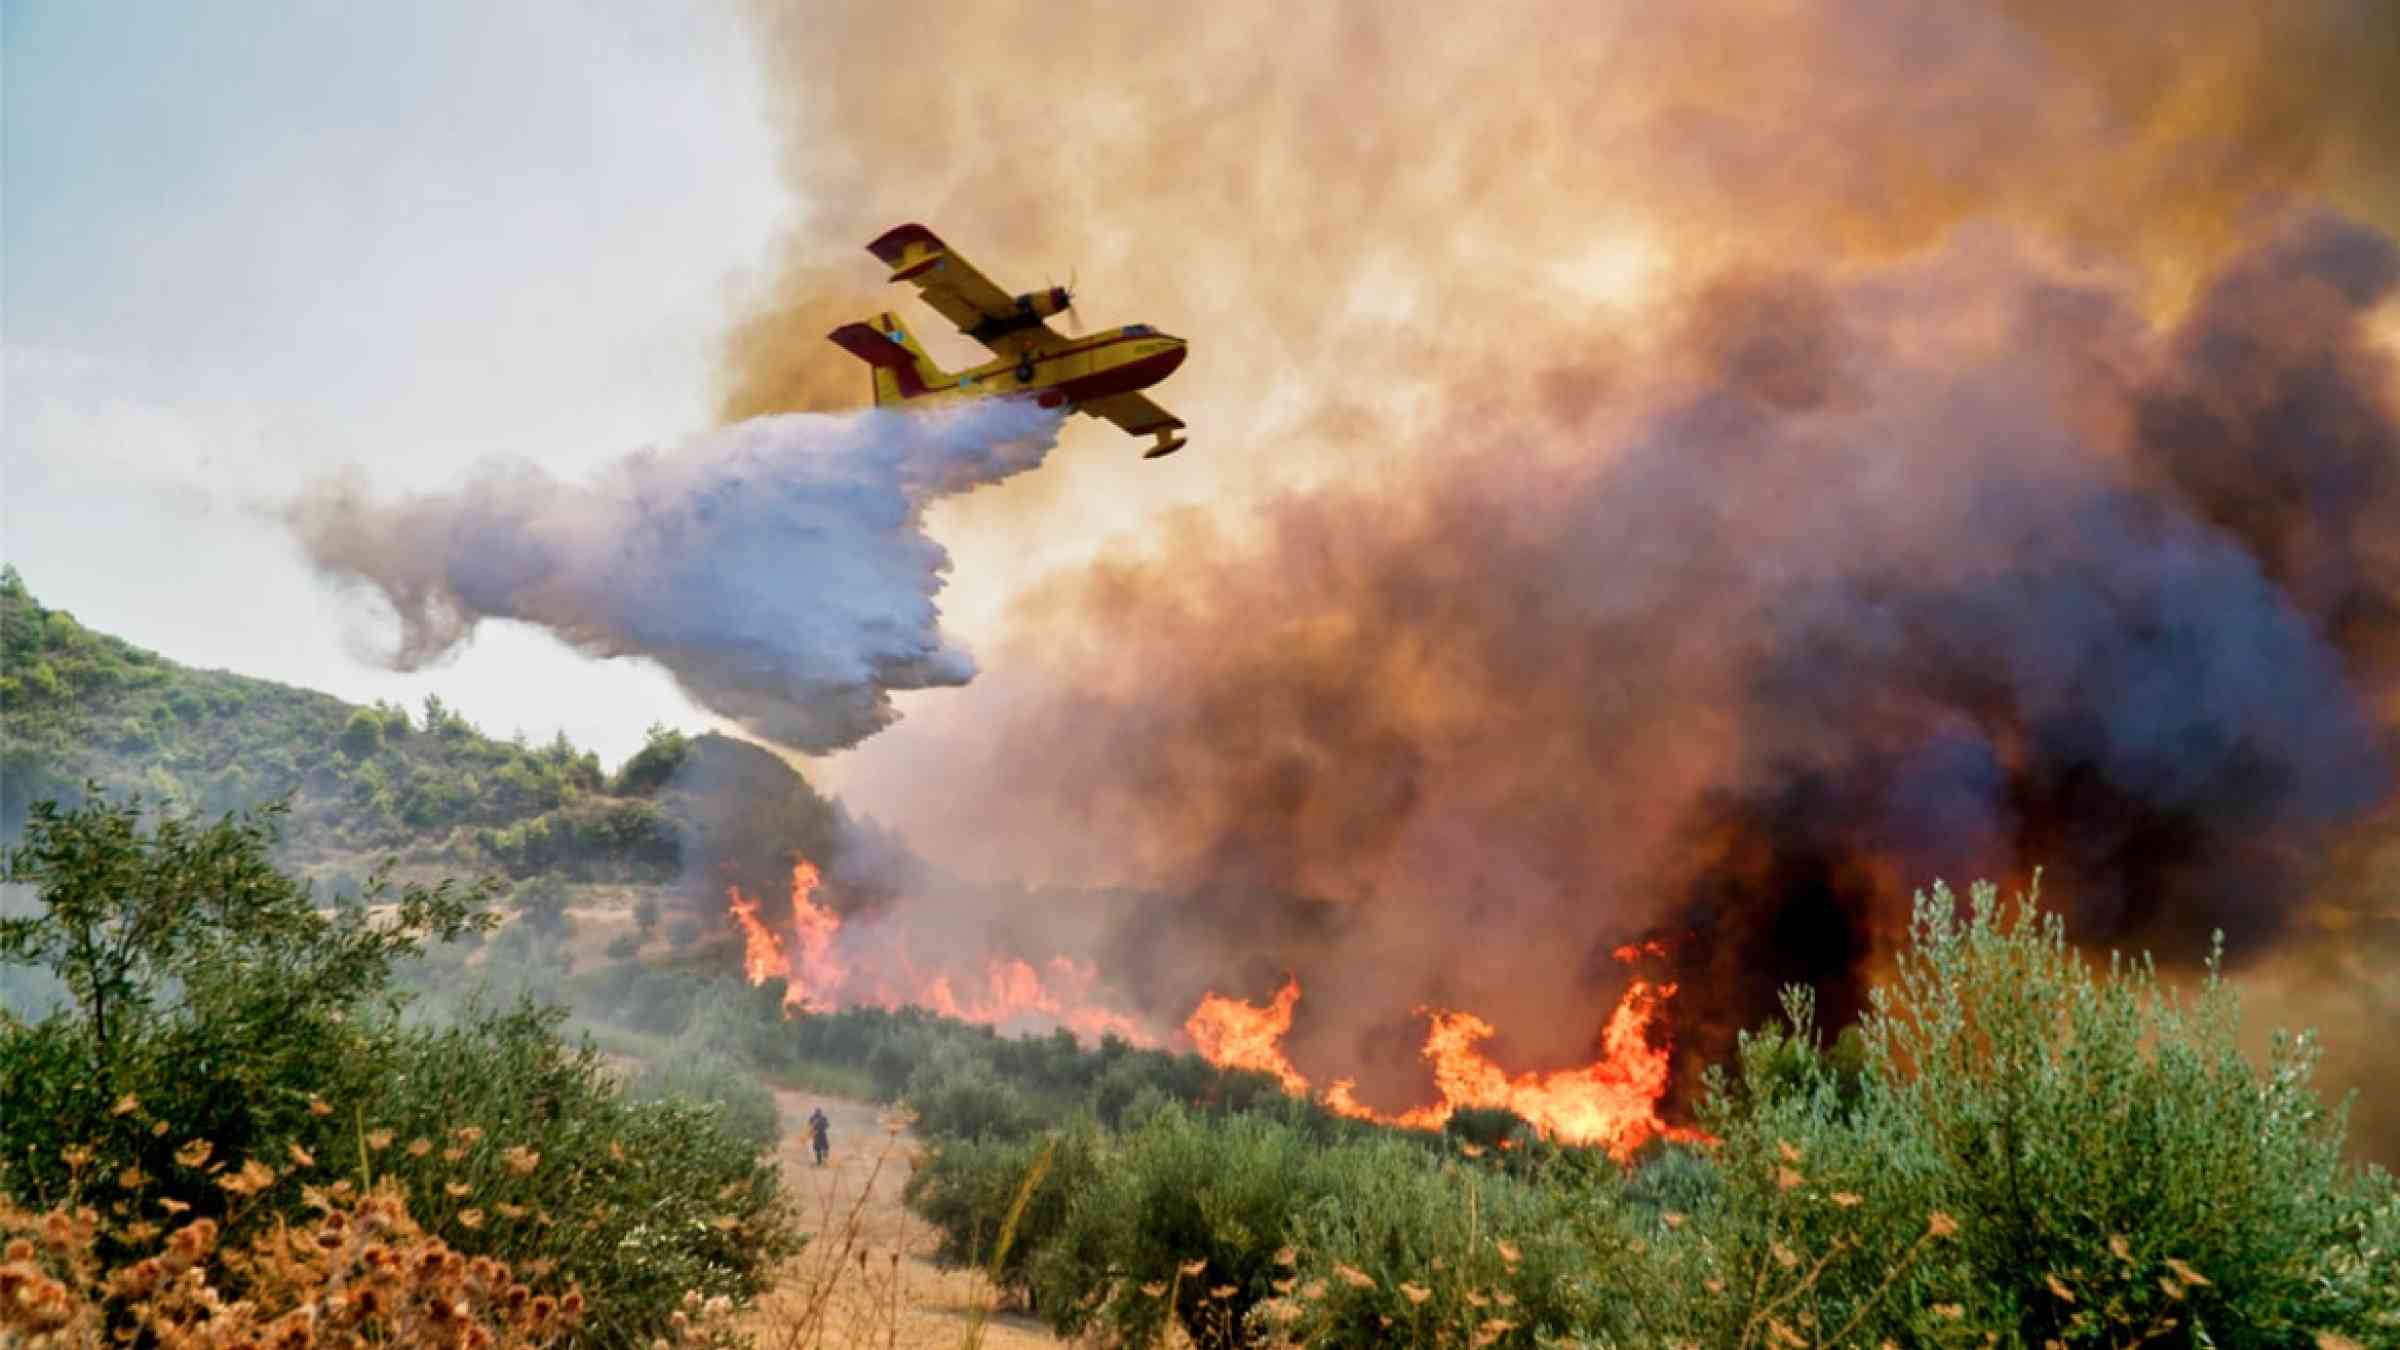 A firefighting plane releases its load of water as it tries to extinguish a fire in Xelidoni village in the area of Ancient Olympia, Greece (2021)